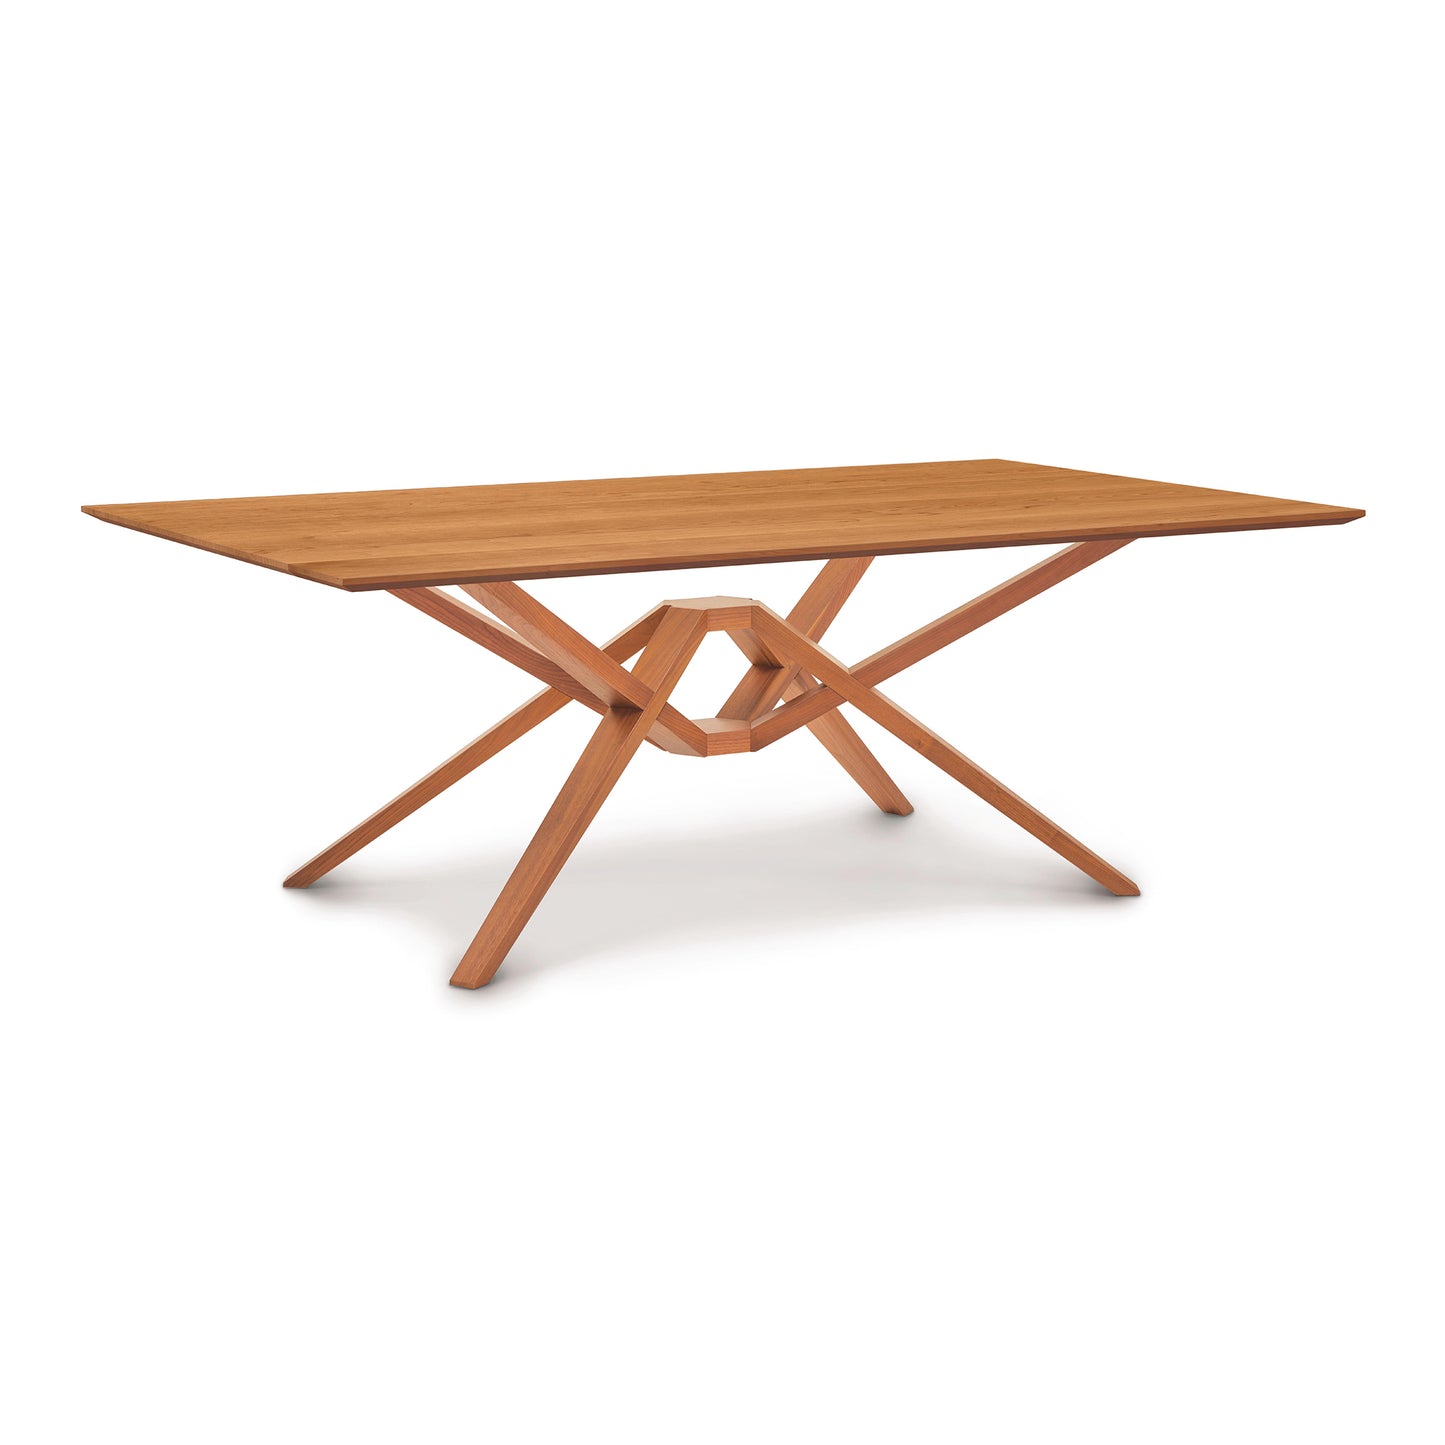 The Copeland Furniture Exeter Solid Top Dining Table features an isometric engineering design with a geometric base, giving it a modern aesthetic.